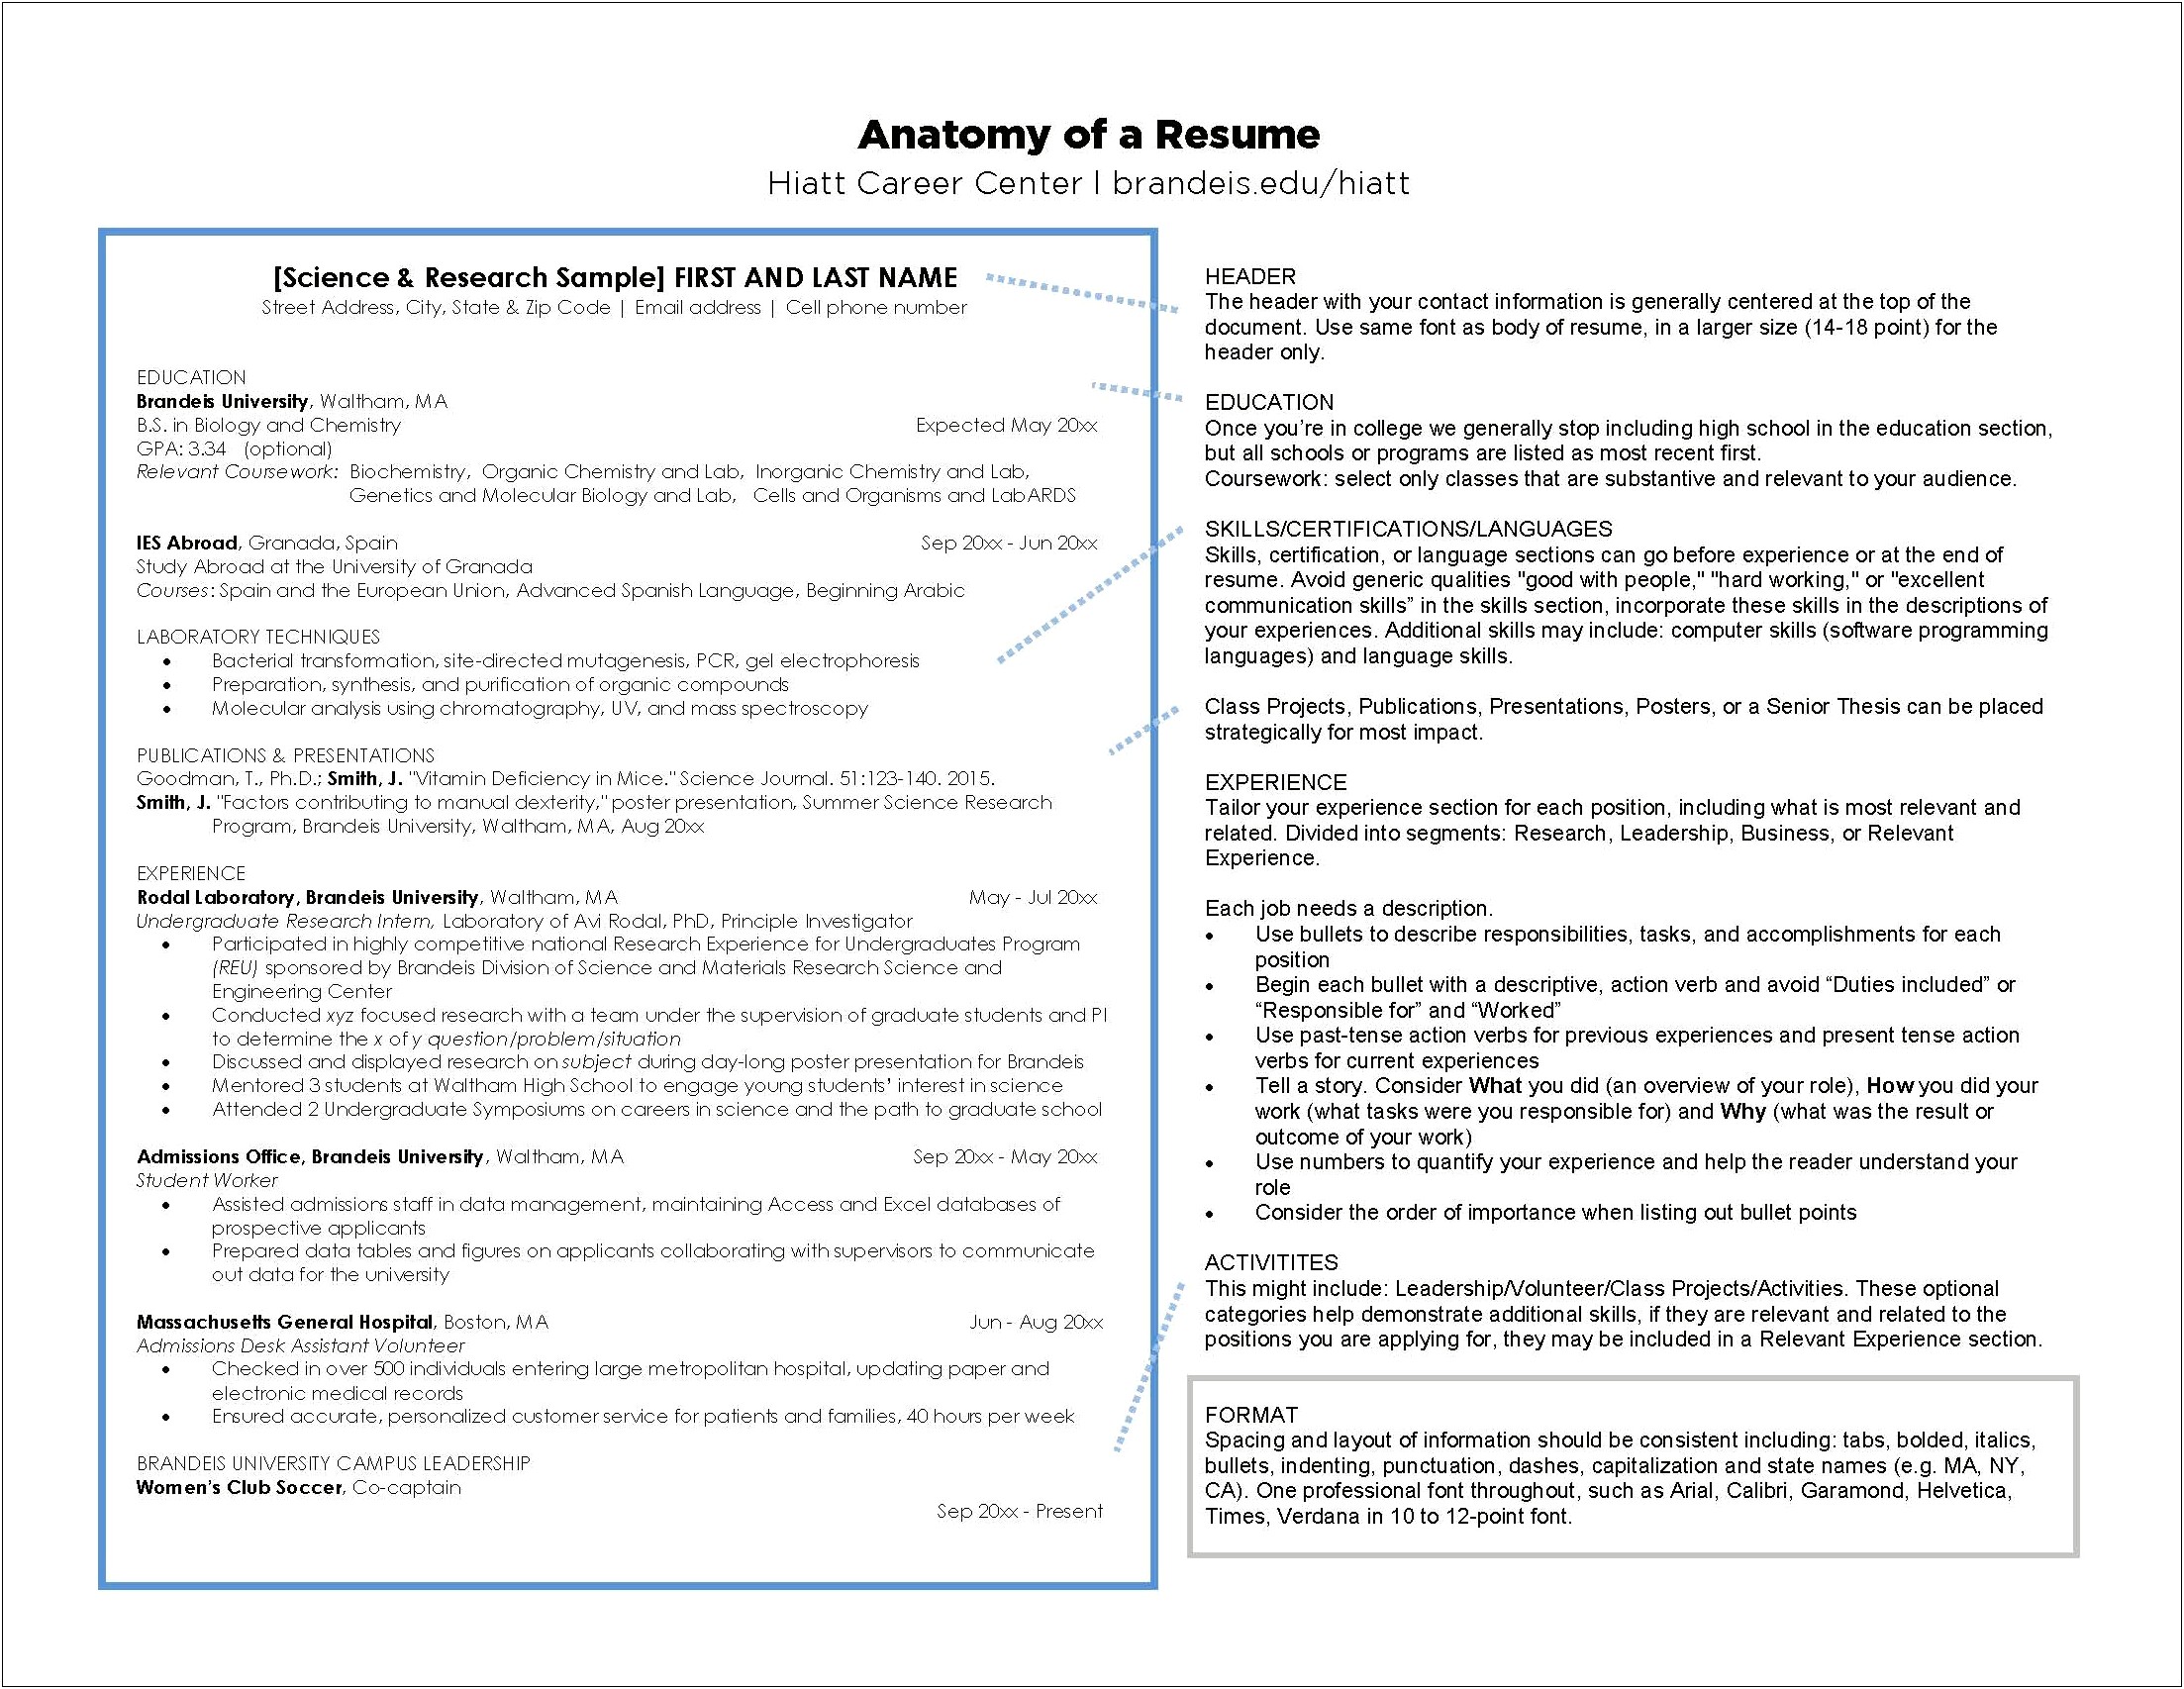 Examples Of The Education Section Of A Resume